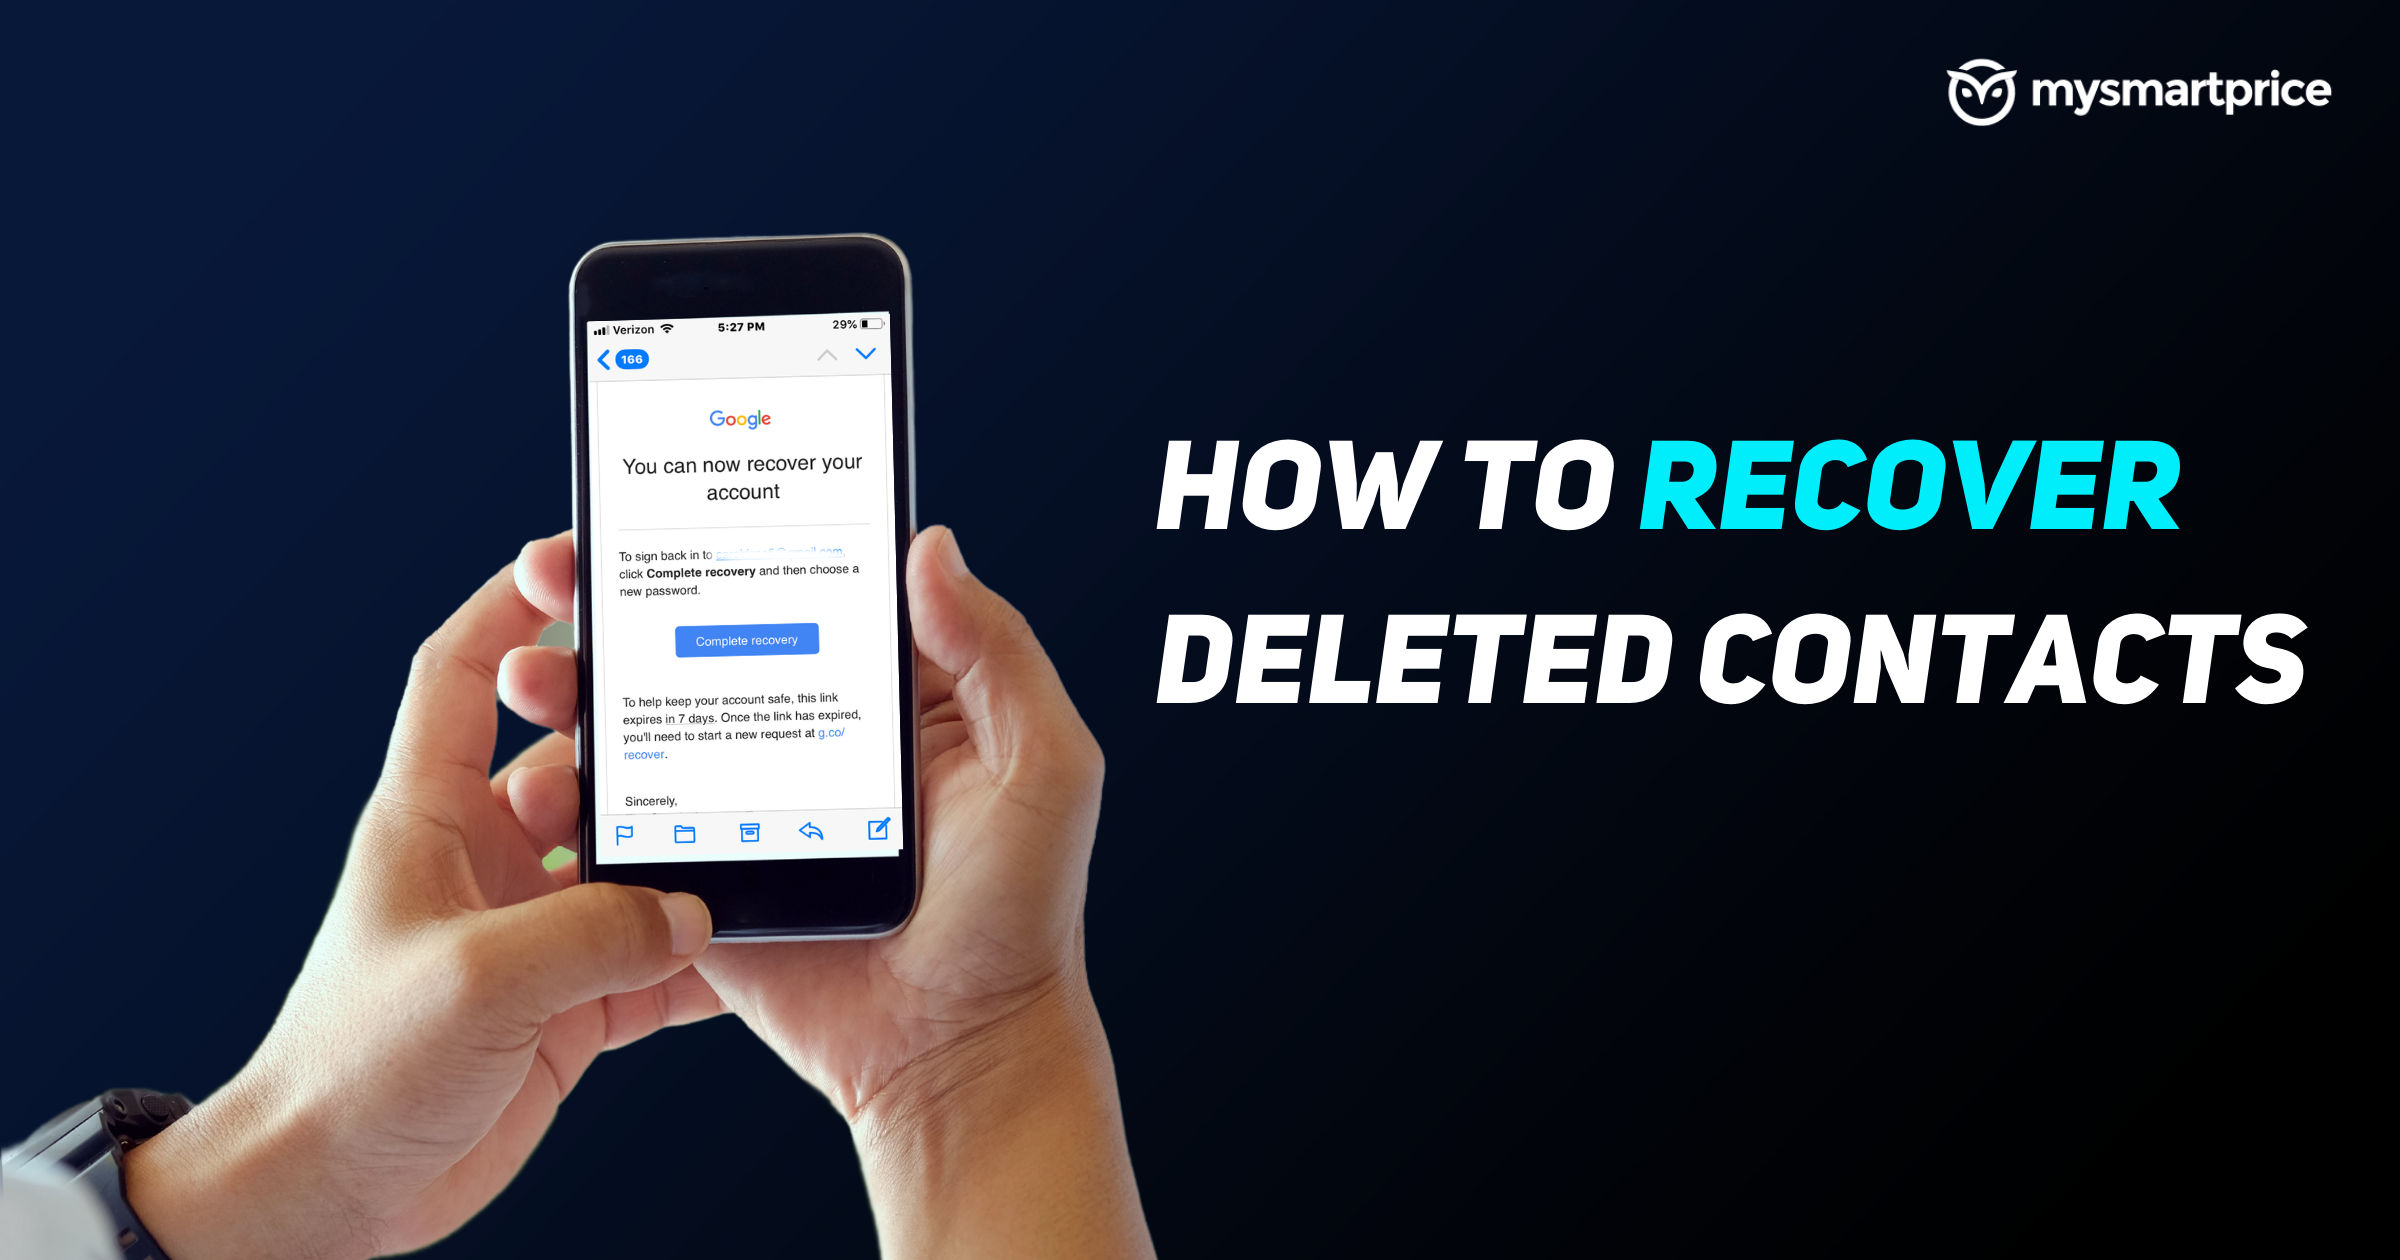 Ways to Recover Deleted Contacts in Android and iPhone